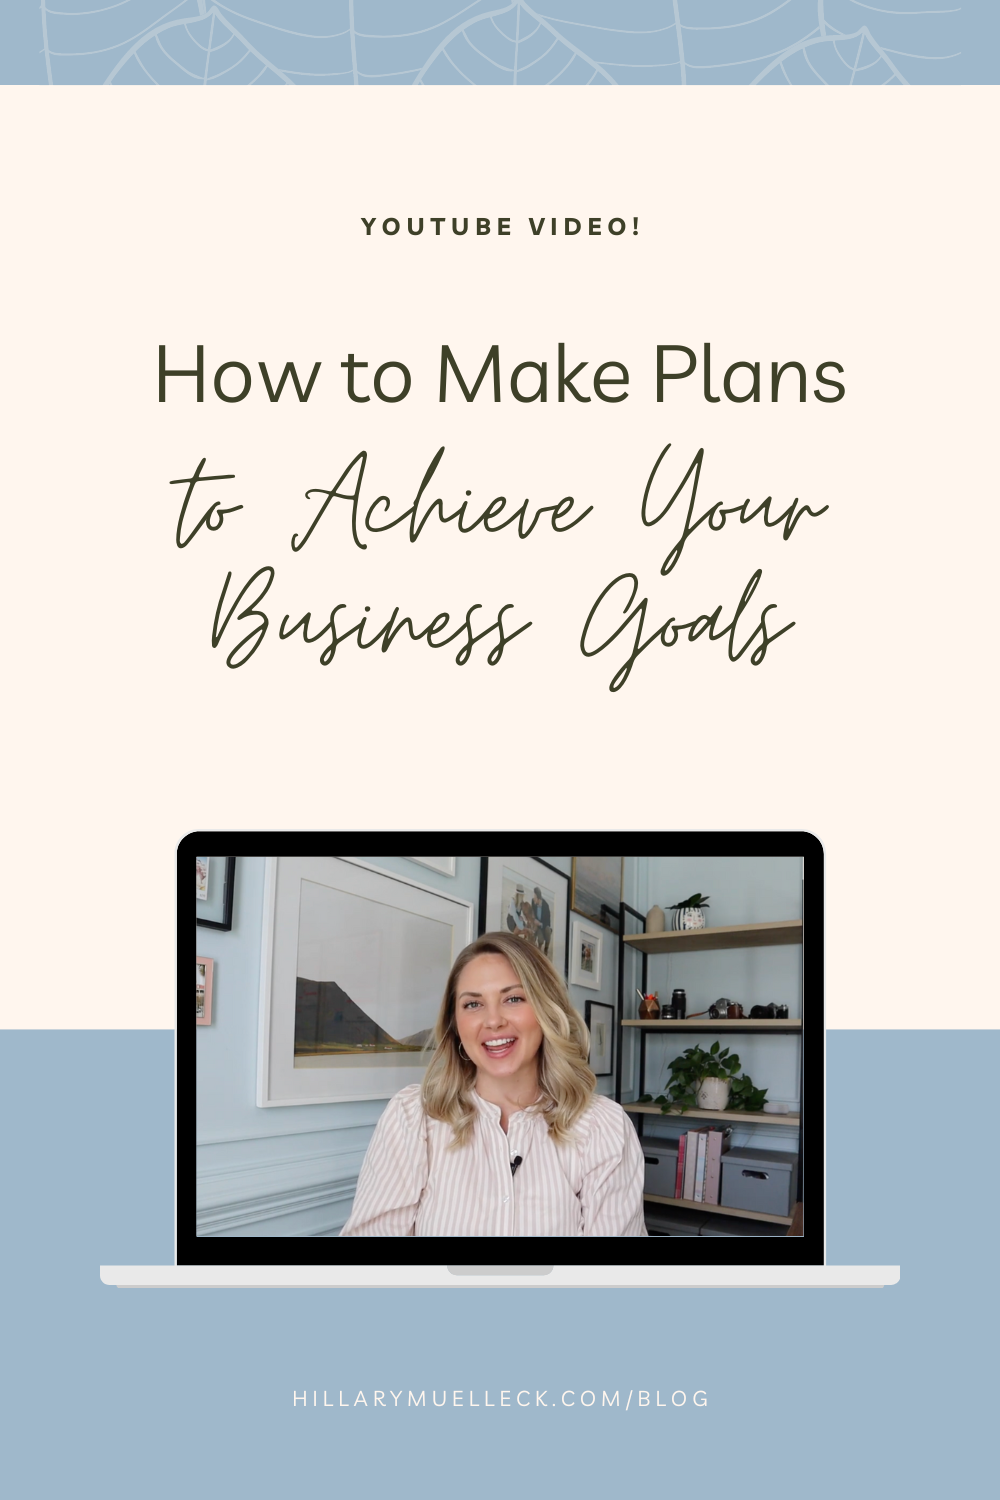 How to Create a Plan to Achieve Your Business Goals: Hillary Muelleck shares how she breaks down goals into action steps for her business